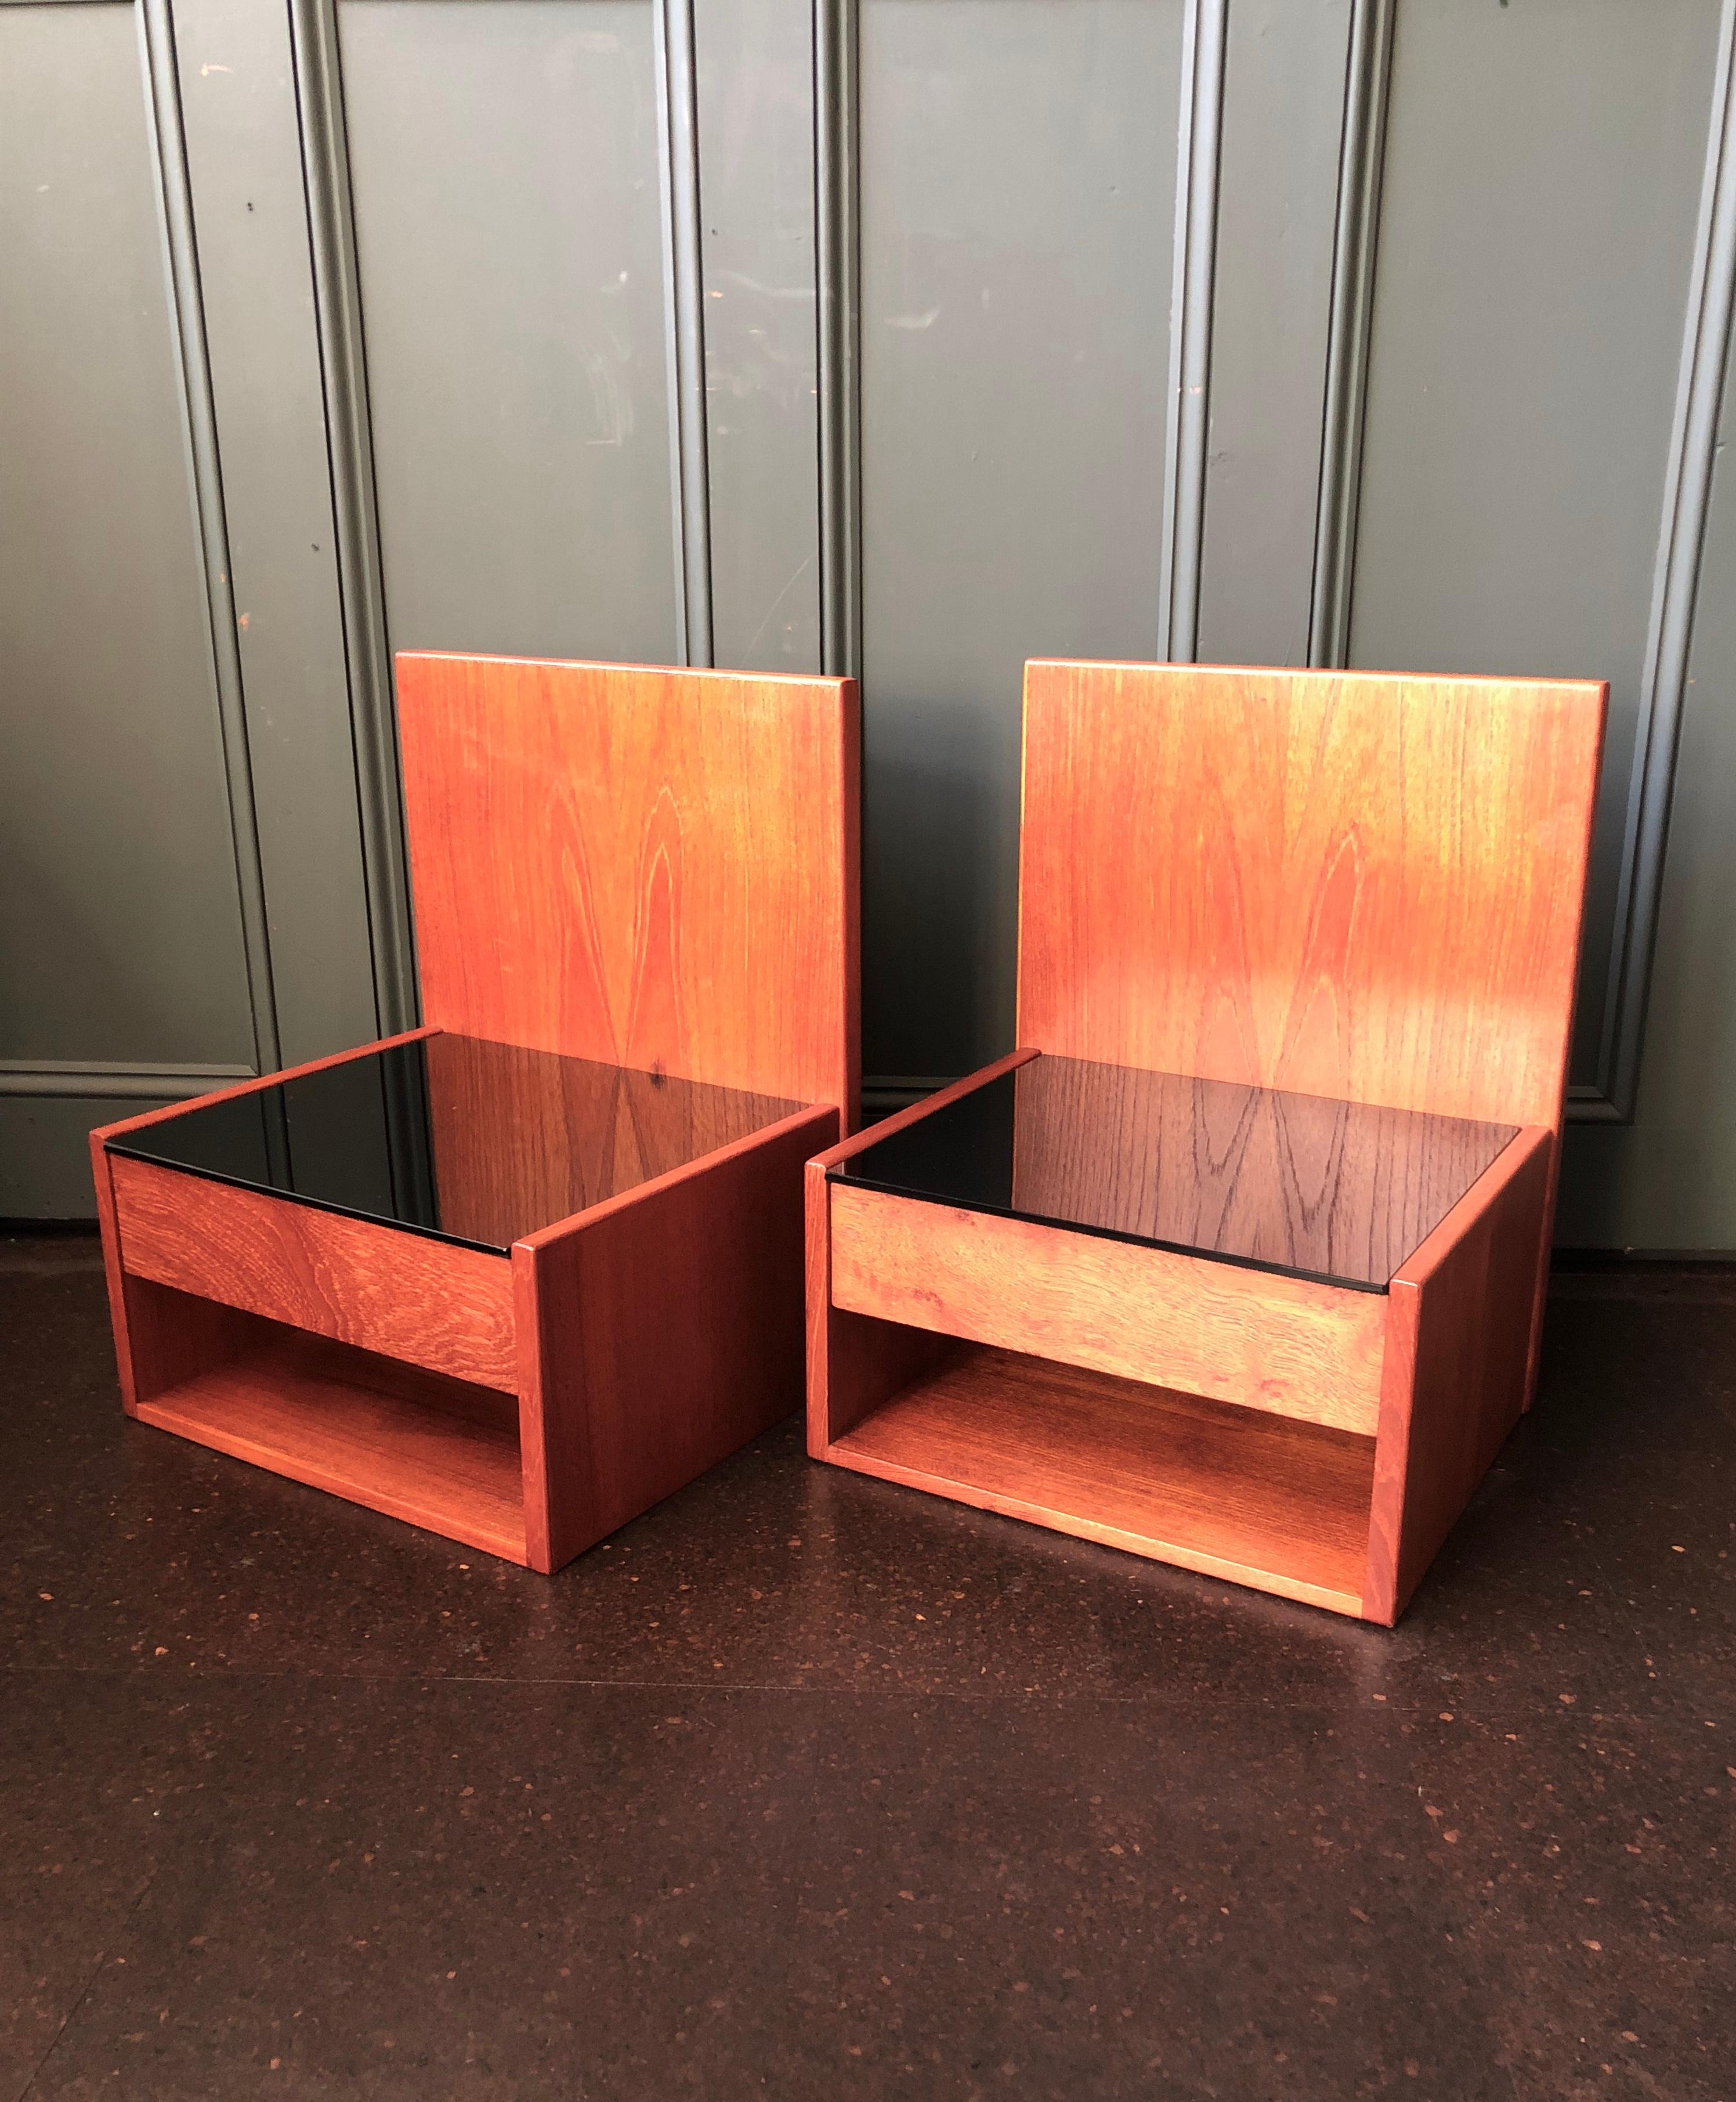 A pair of original Danish midcentury 1960s Hans Wegner nightstands. Constructed from teak with a black glass surface. Manufactured by GETAMA, Denmark. Beautifully modernist design from the Danish master. These are designed to be ‘floating’